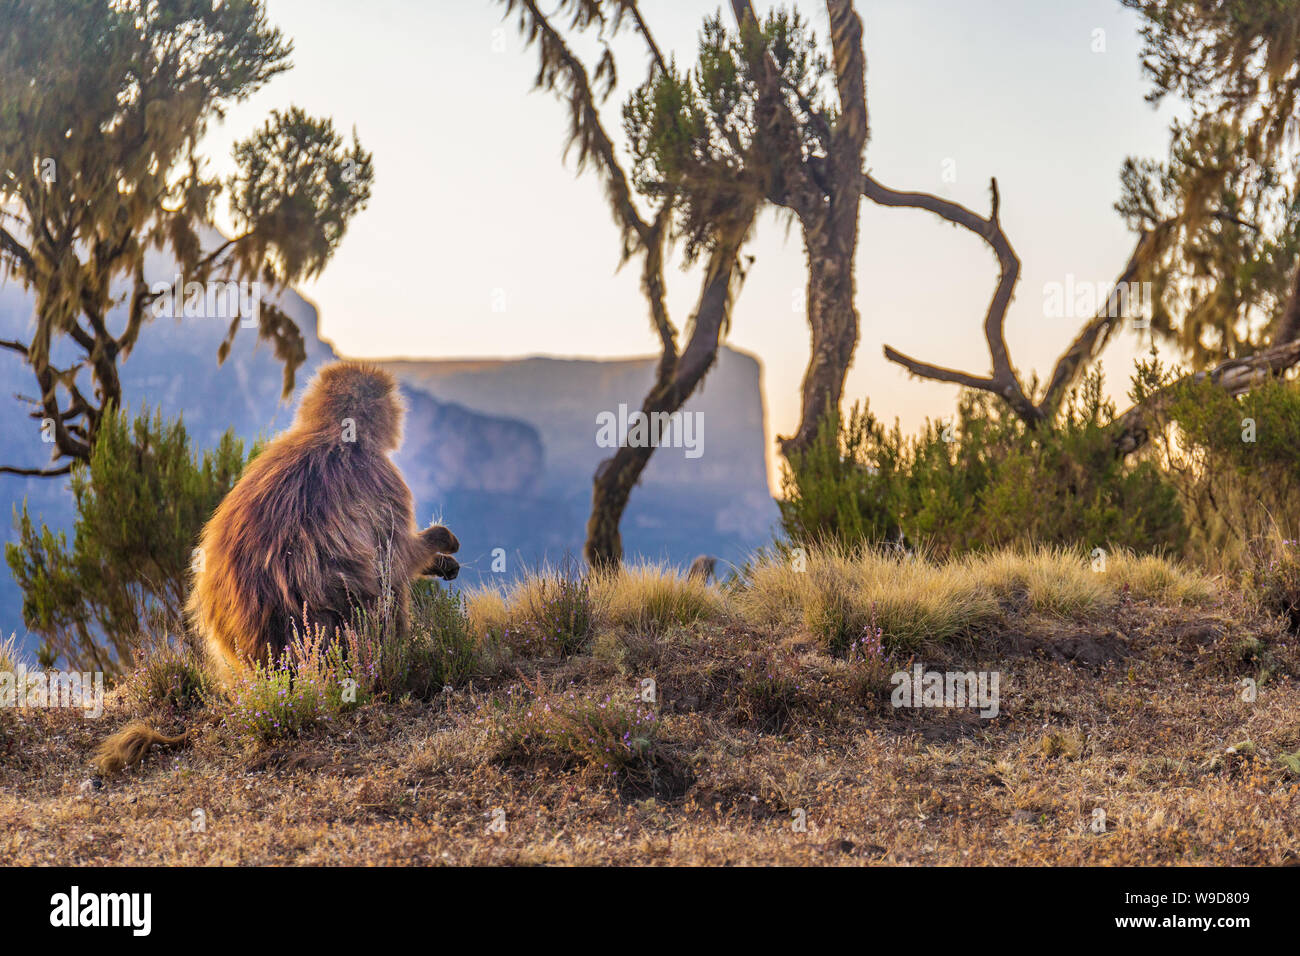 Baboon in the amazing landscape of Simian mountains Stock Photo